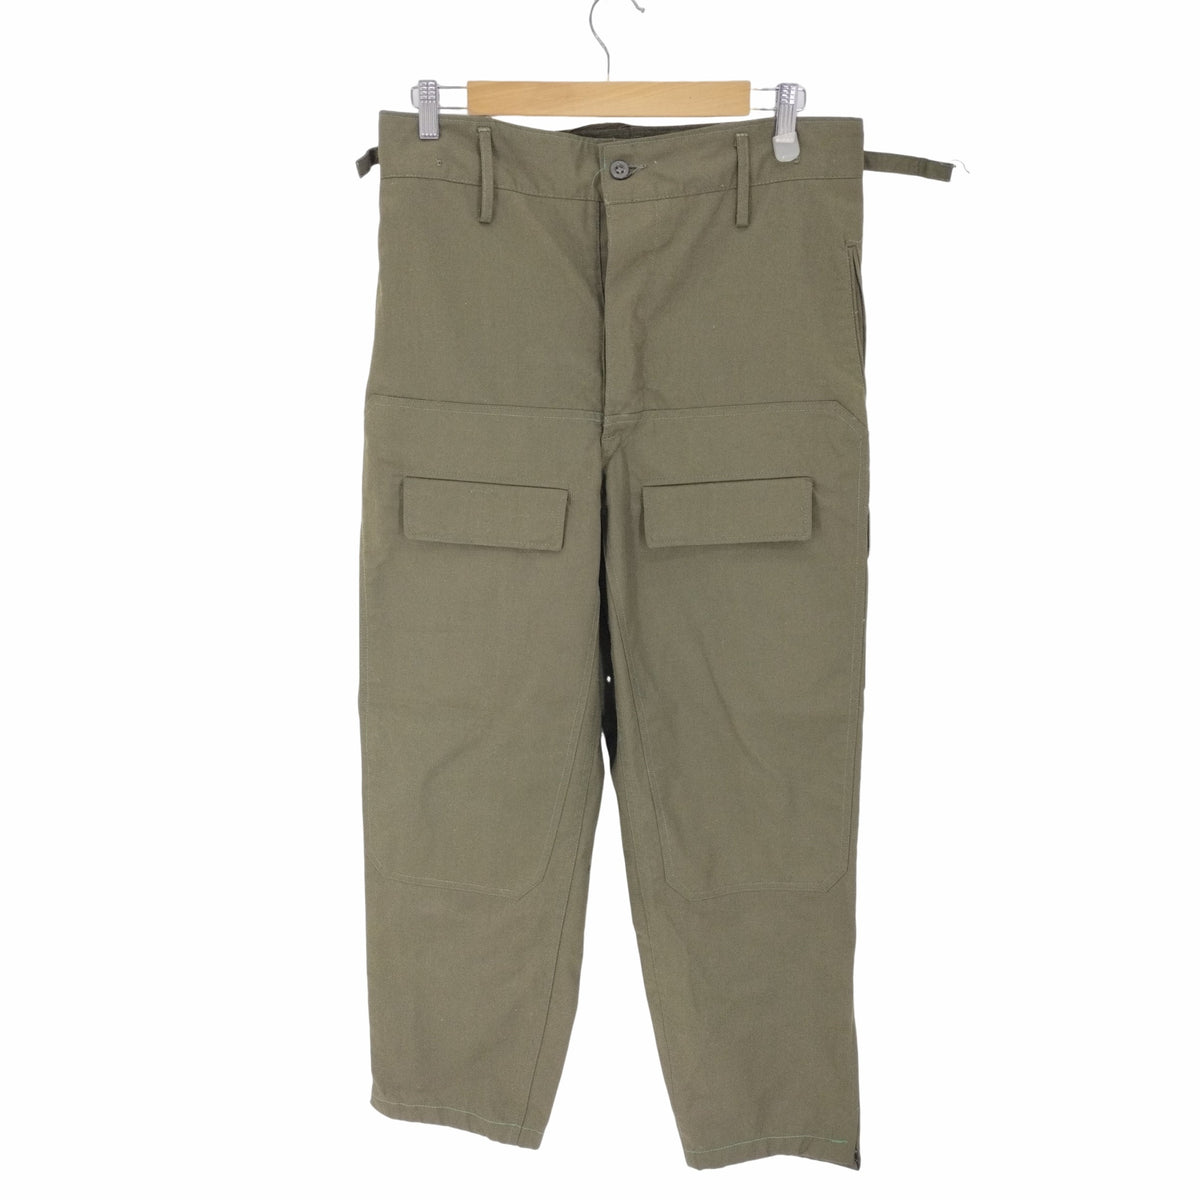 CZECH ARMY M DOUBLE KNEEN FIELD CARGO PANT チェコ軍 M